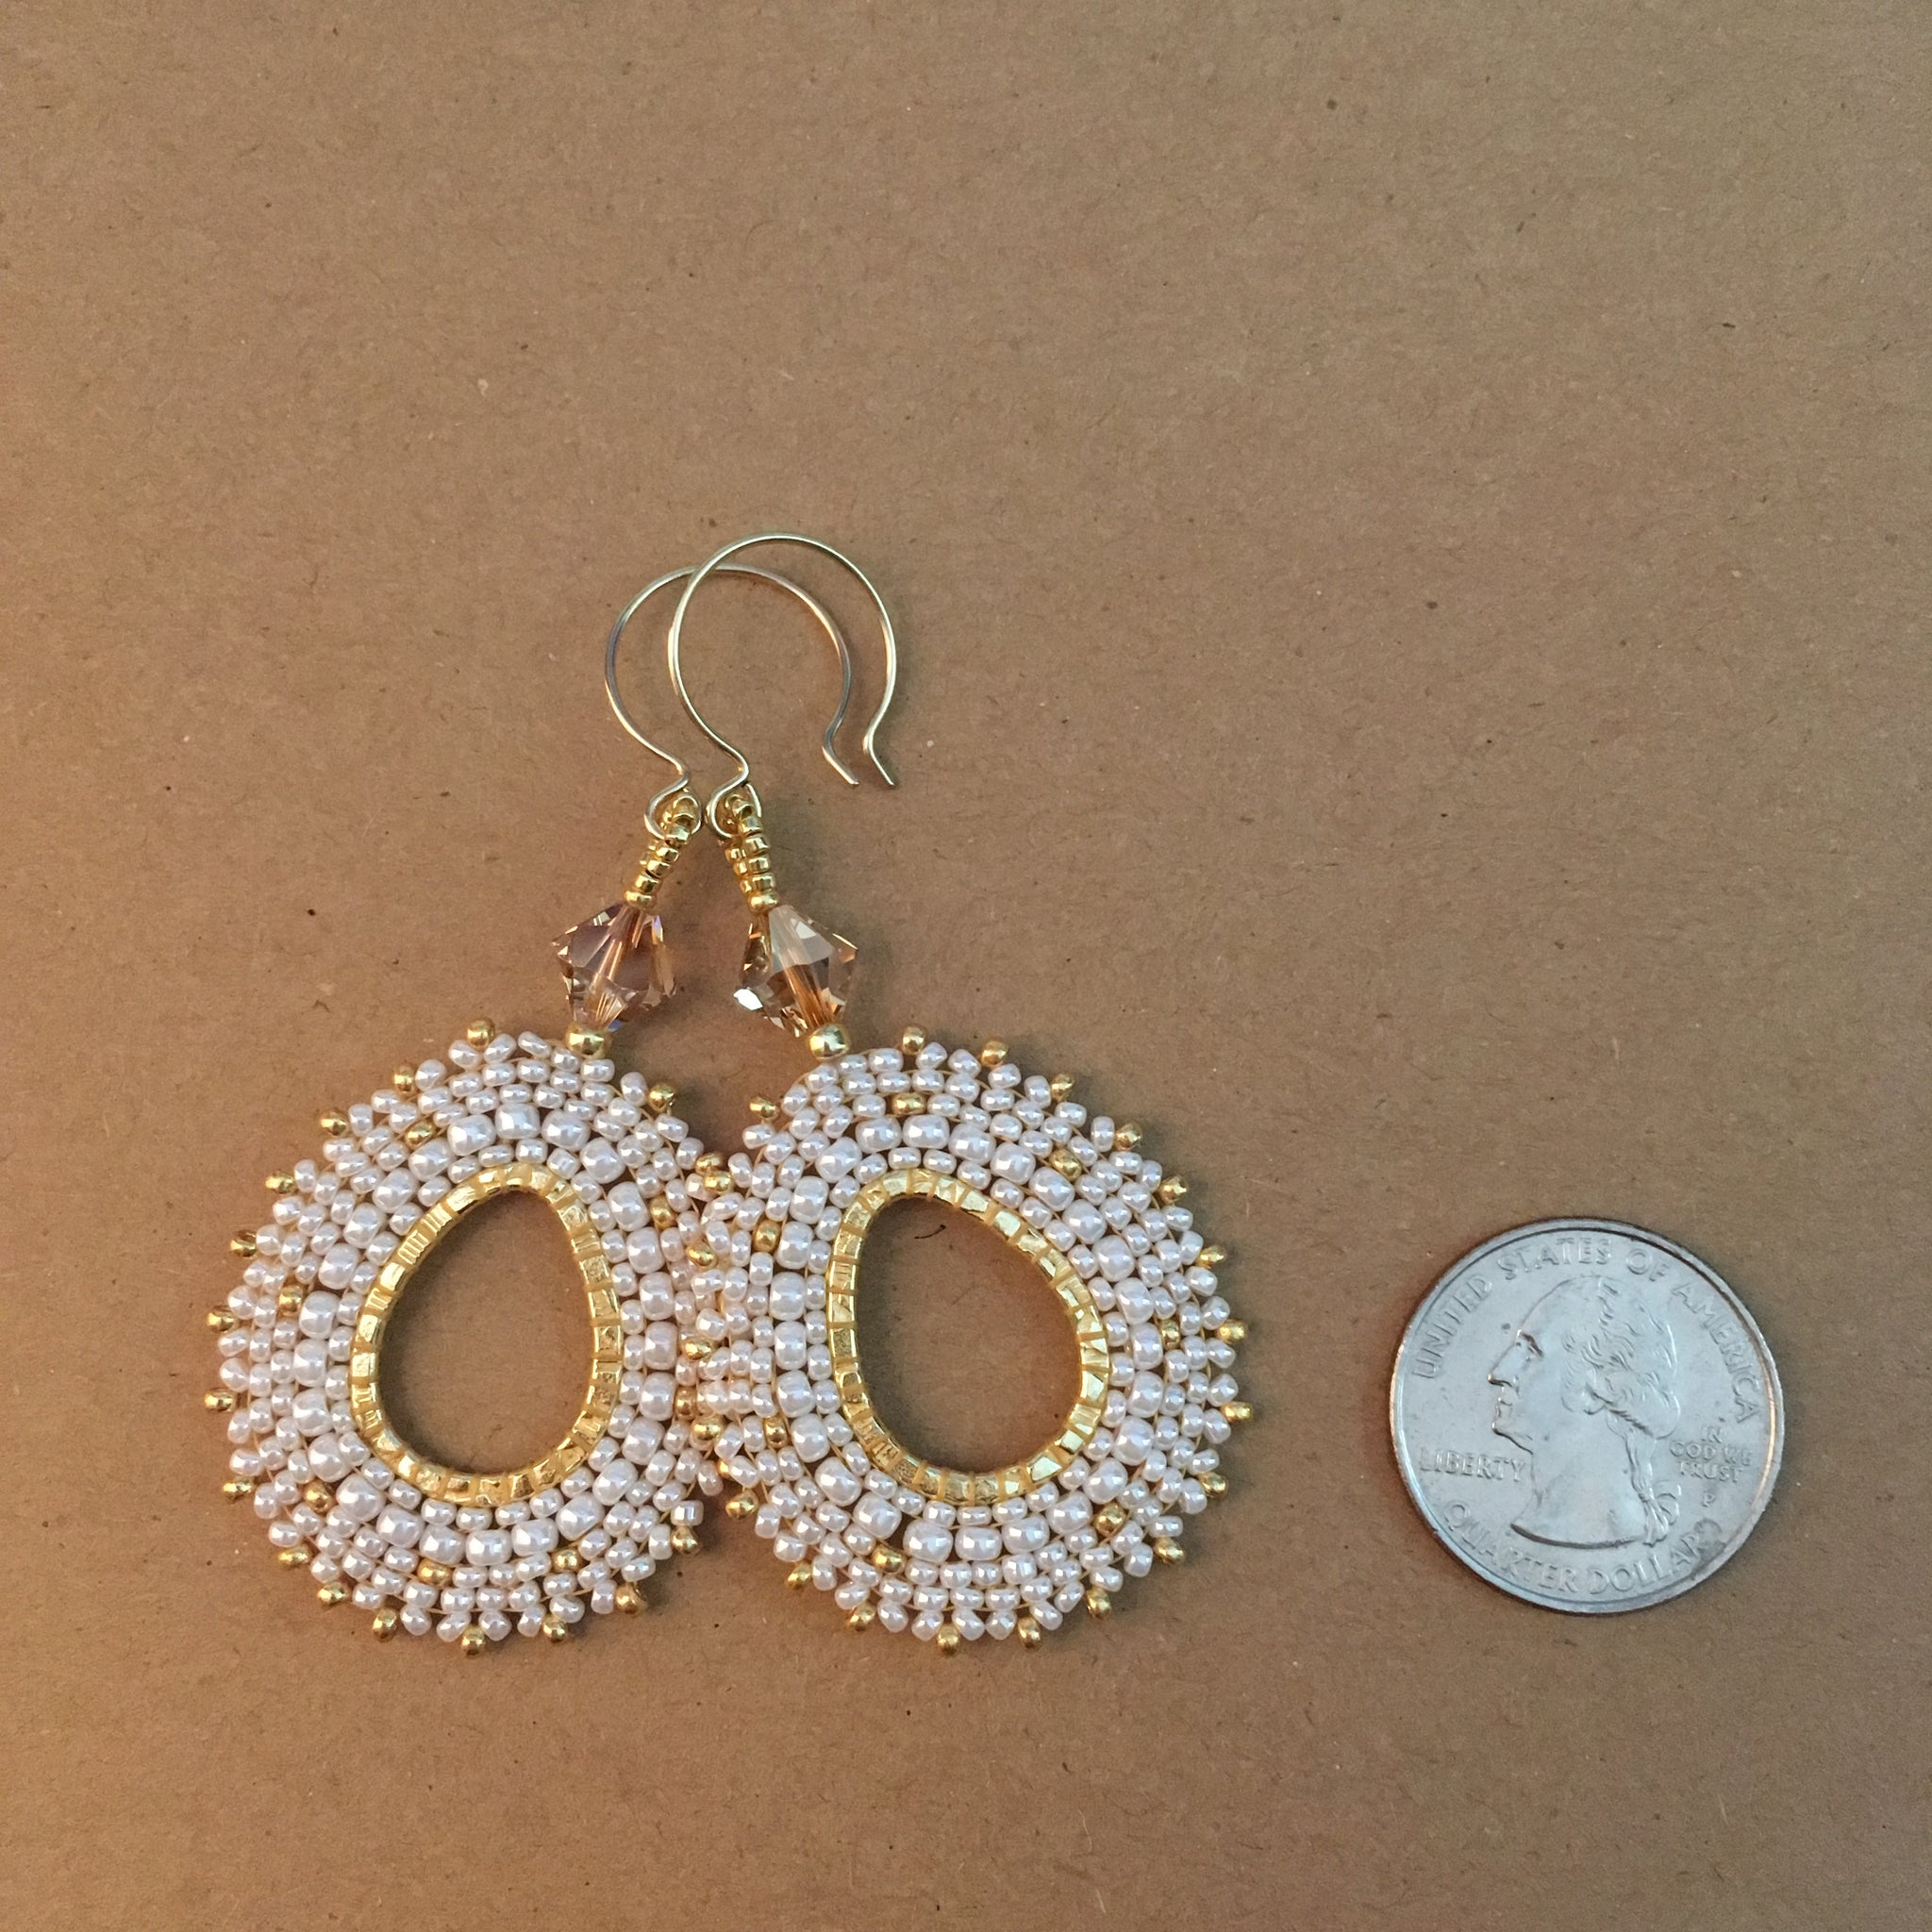 Pearly White and Gold Oval Hoop Beaded Earrings with Swarovski™ Crystals